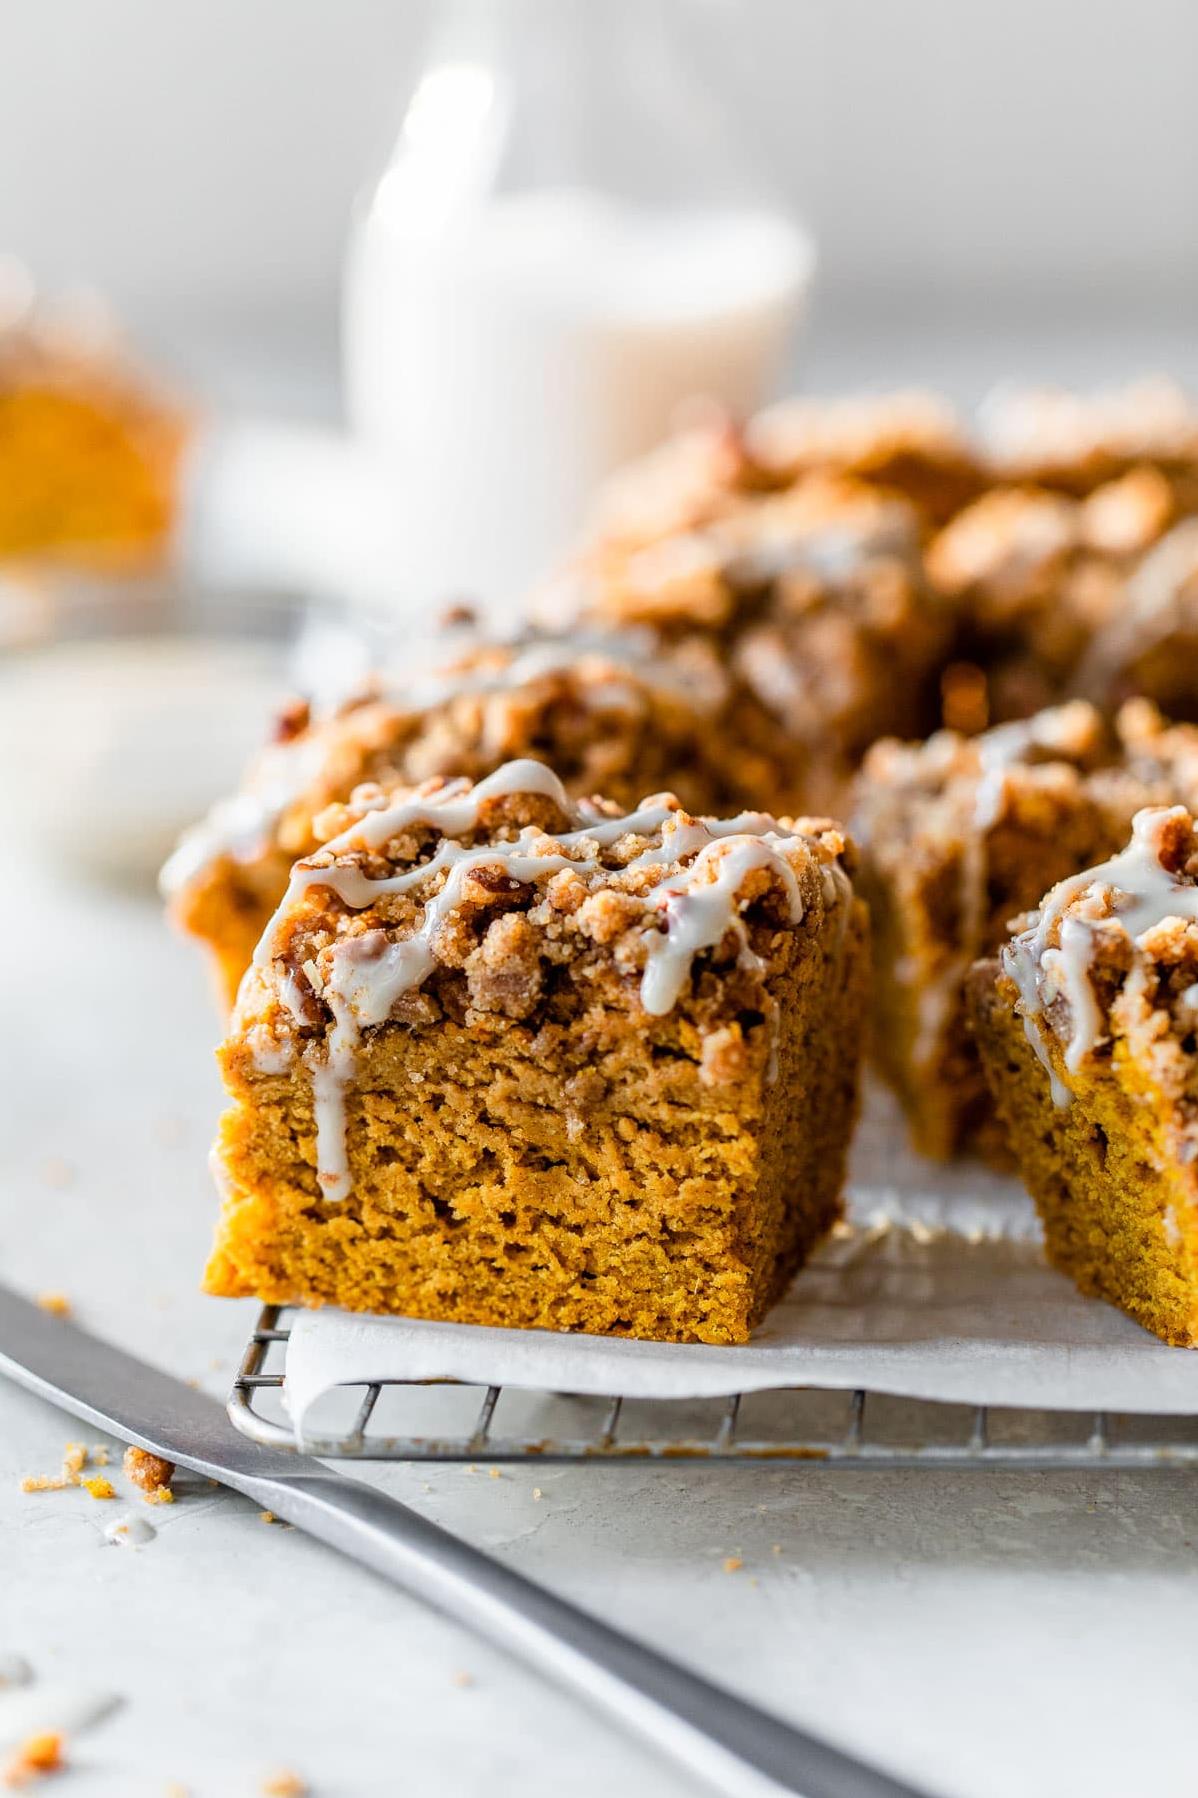  Get ready to fall in love with this delicious pumpkin coffee cake recipe.